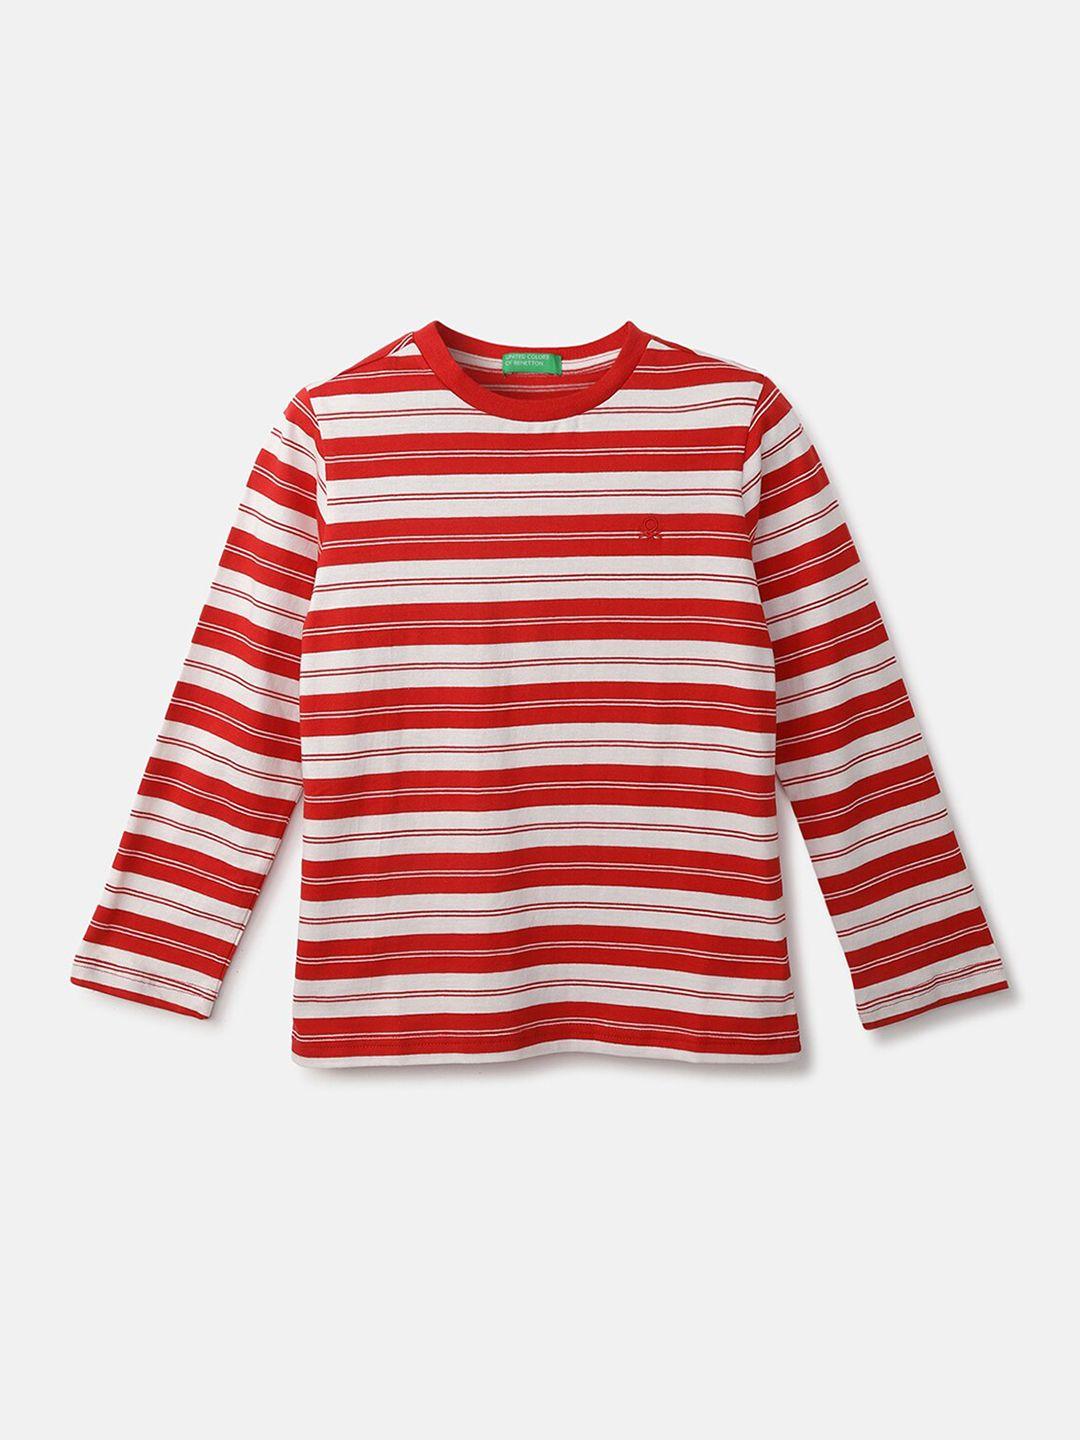 united-colors-of-benetton-boys-red-striped-t-shirt